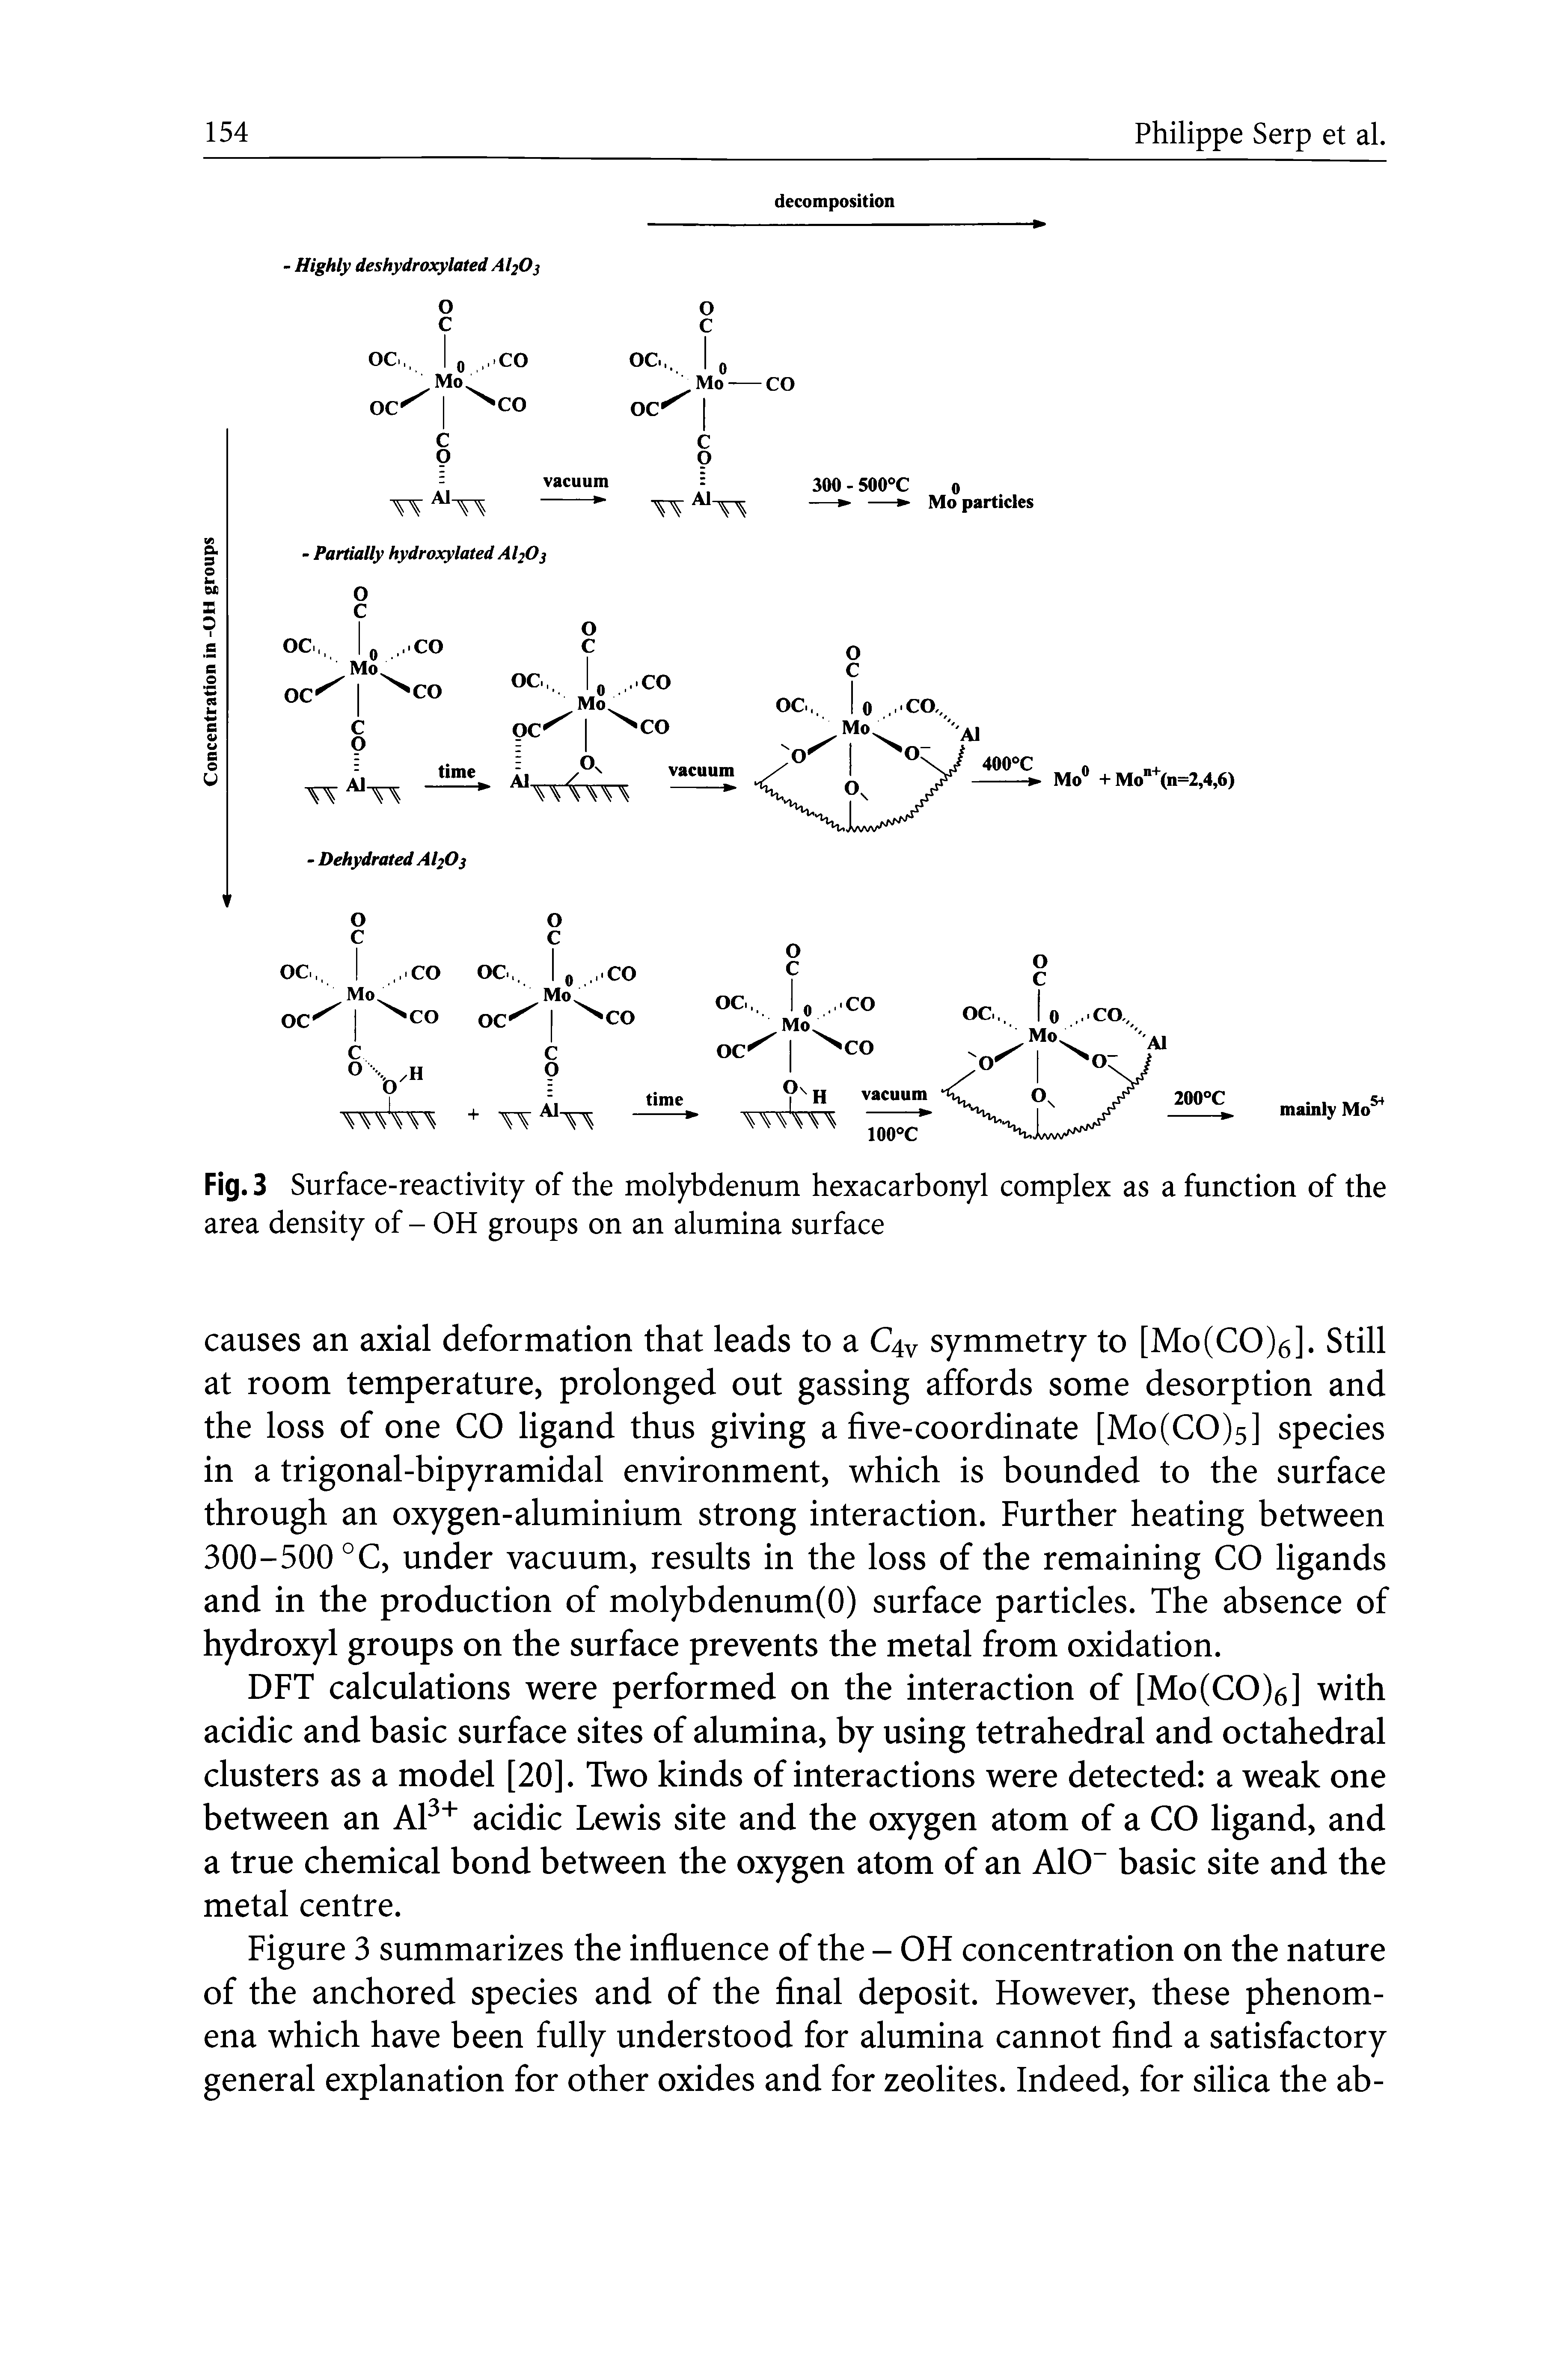 Fig. 3 Surface-reactivity of the molybdenum hexacarbonyl complex as a function of the area density of - OH groups on an alumina surface...